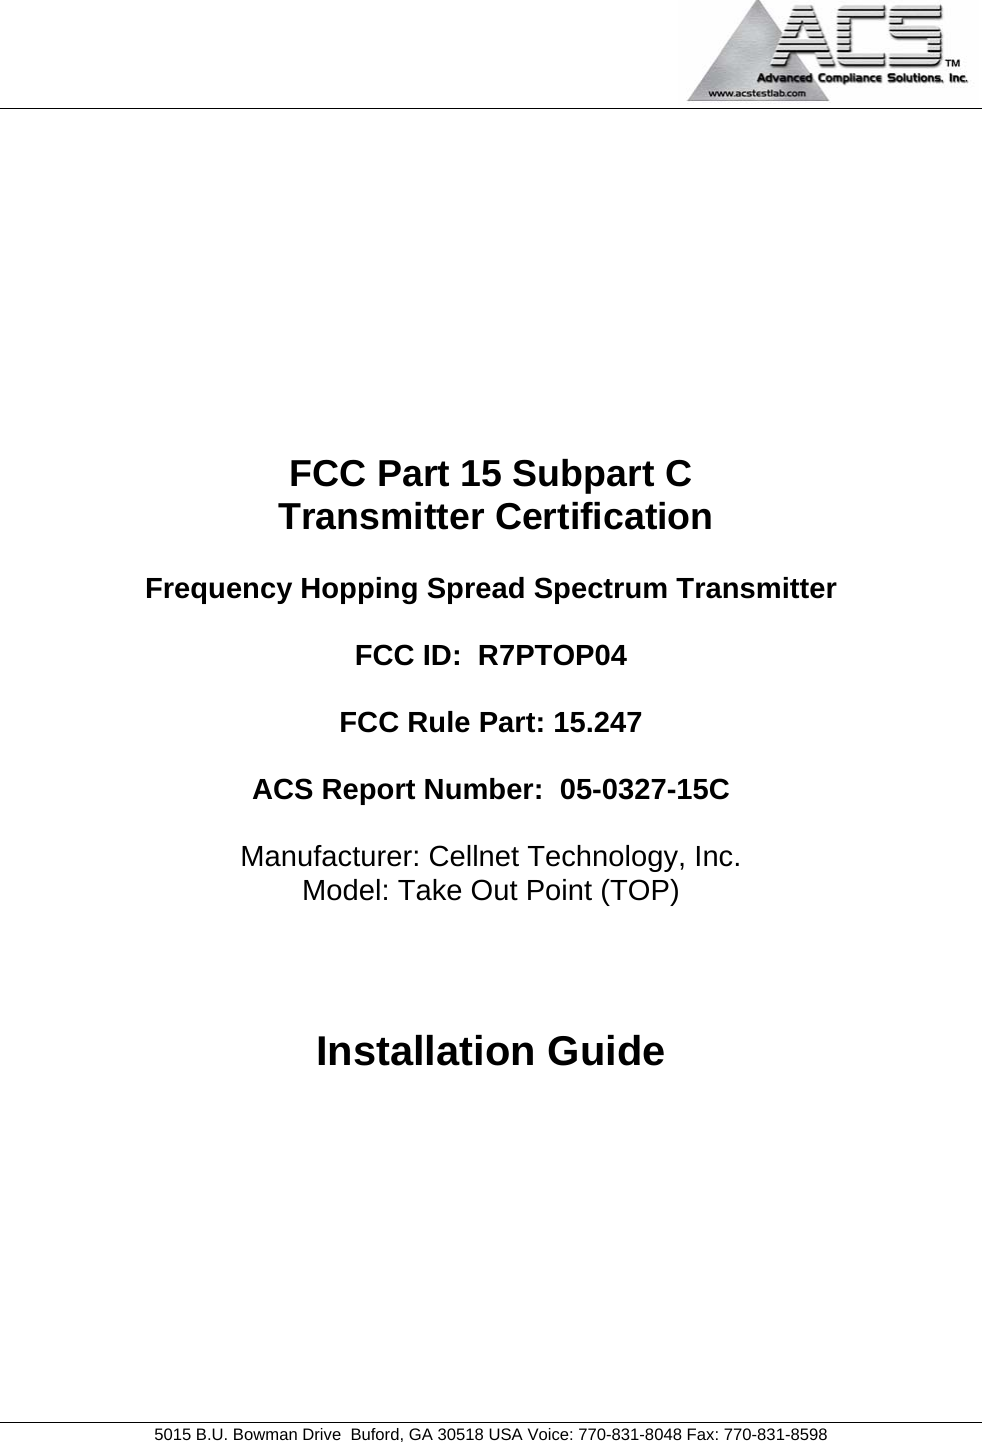    5015 B.U. Bowman Drive  Buford, GA 30518 USA Voice: 770-831-8048 Fax: 770-831-8598   FCC Part 15 Subpart C  Transmitter Certification  Frequency Hopping Spread Spectrum Transmitter  FCC ID:  R7PTOP04  FCC Rule Part: 15.247  ACS Report Number:  05-0327-15C   Manufacturer: Cellnet Technology, Inc. Model: Take Out Point (TOP)    Installation Guide 